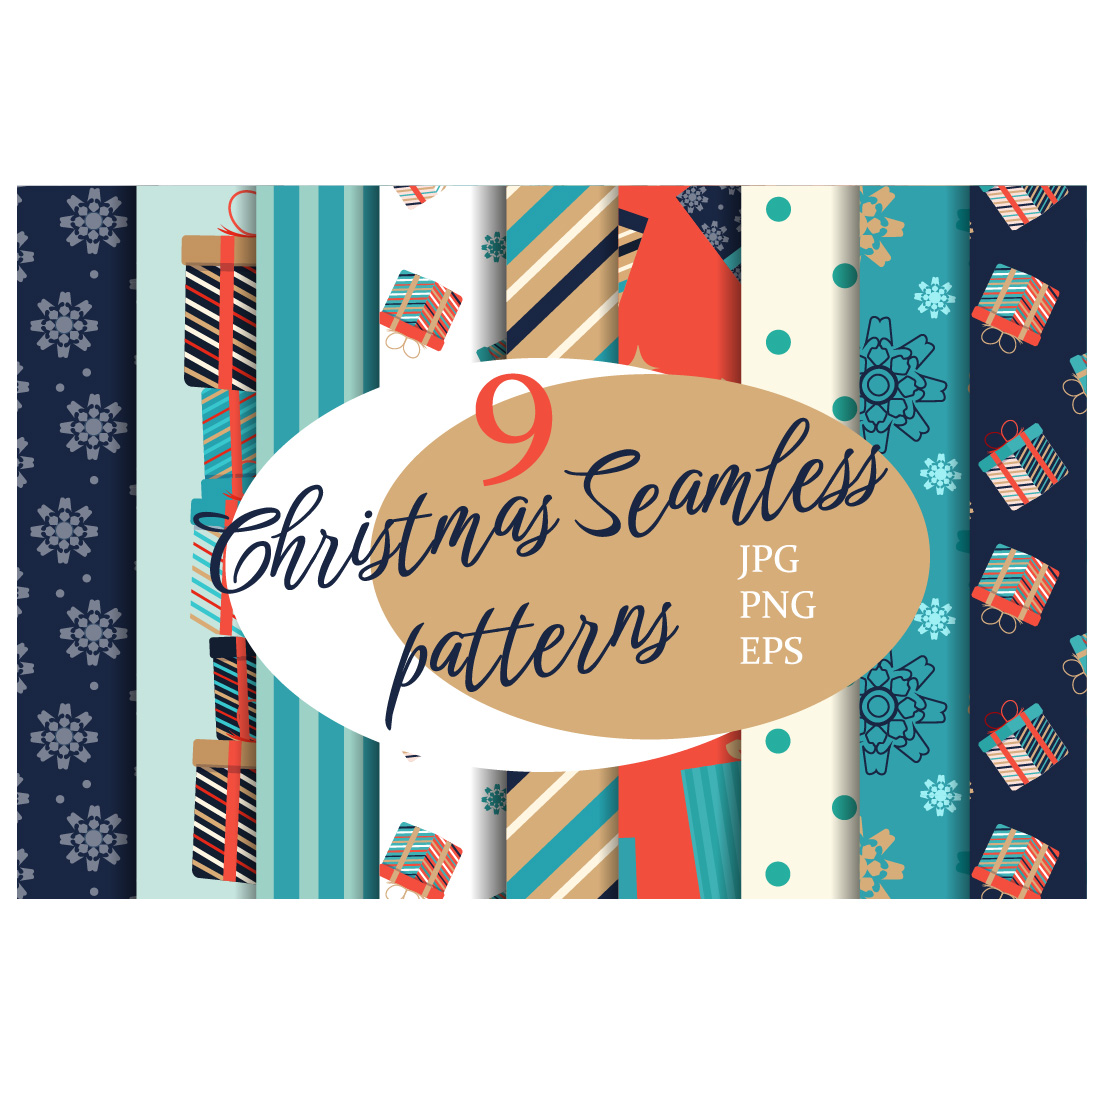 Christmas Seamless Patterns main cover.